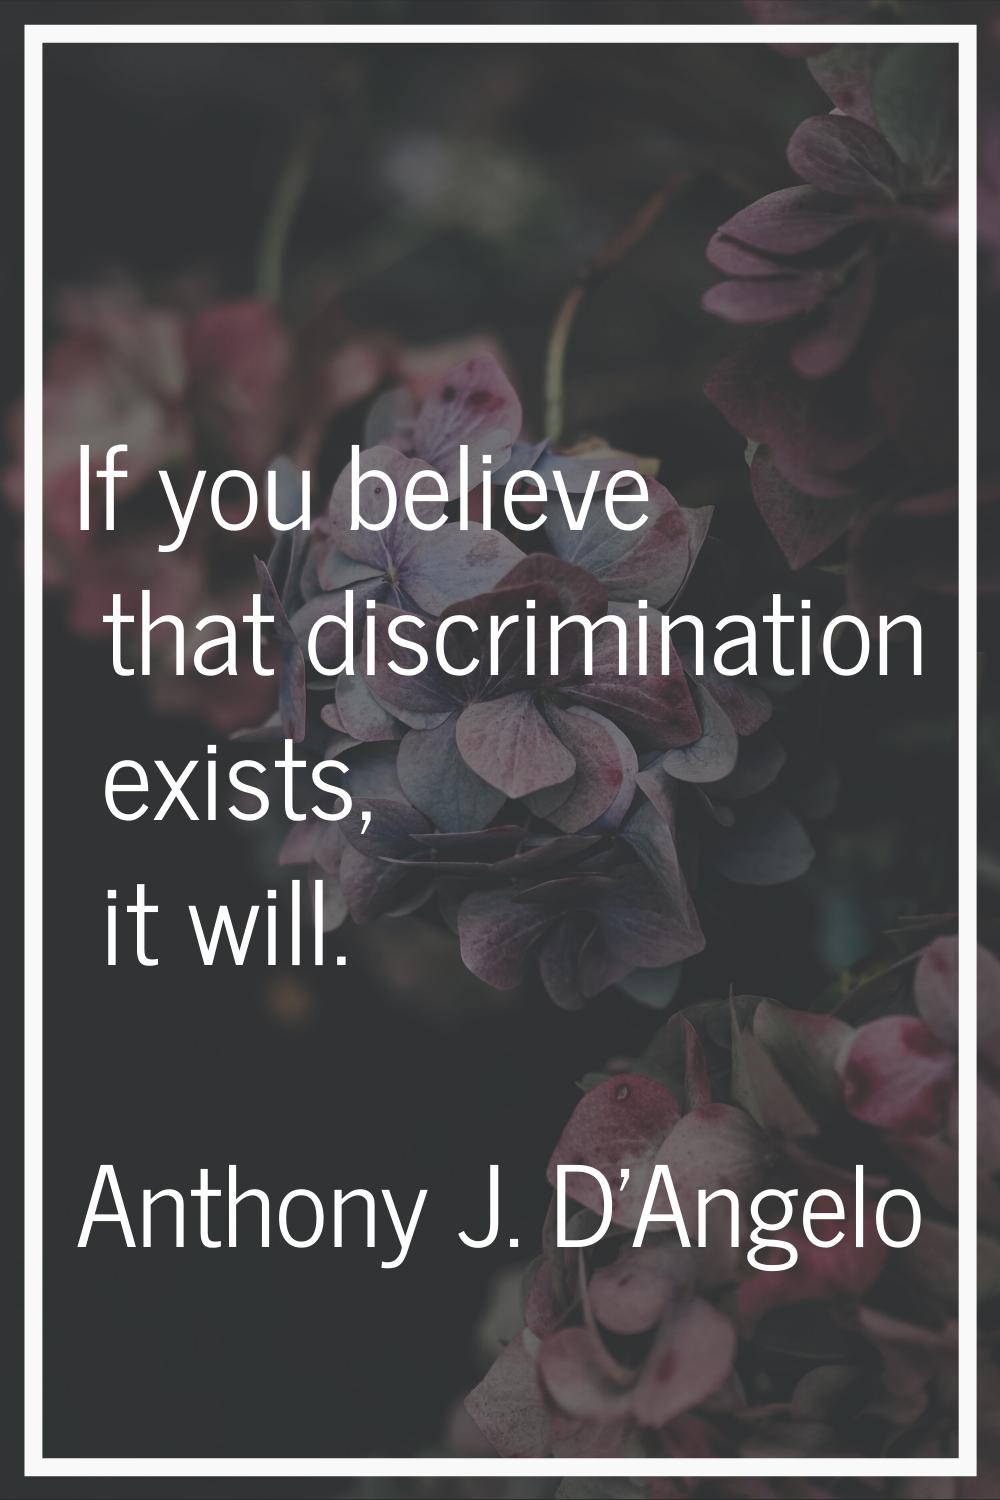 If you believe that discrimination exists, it will.